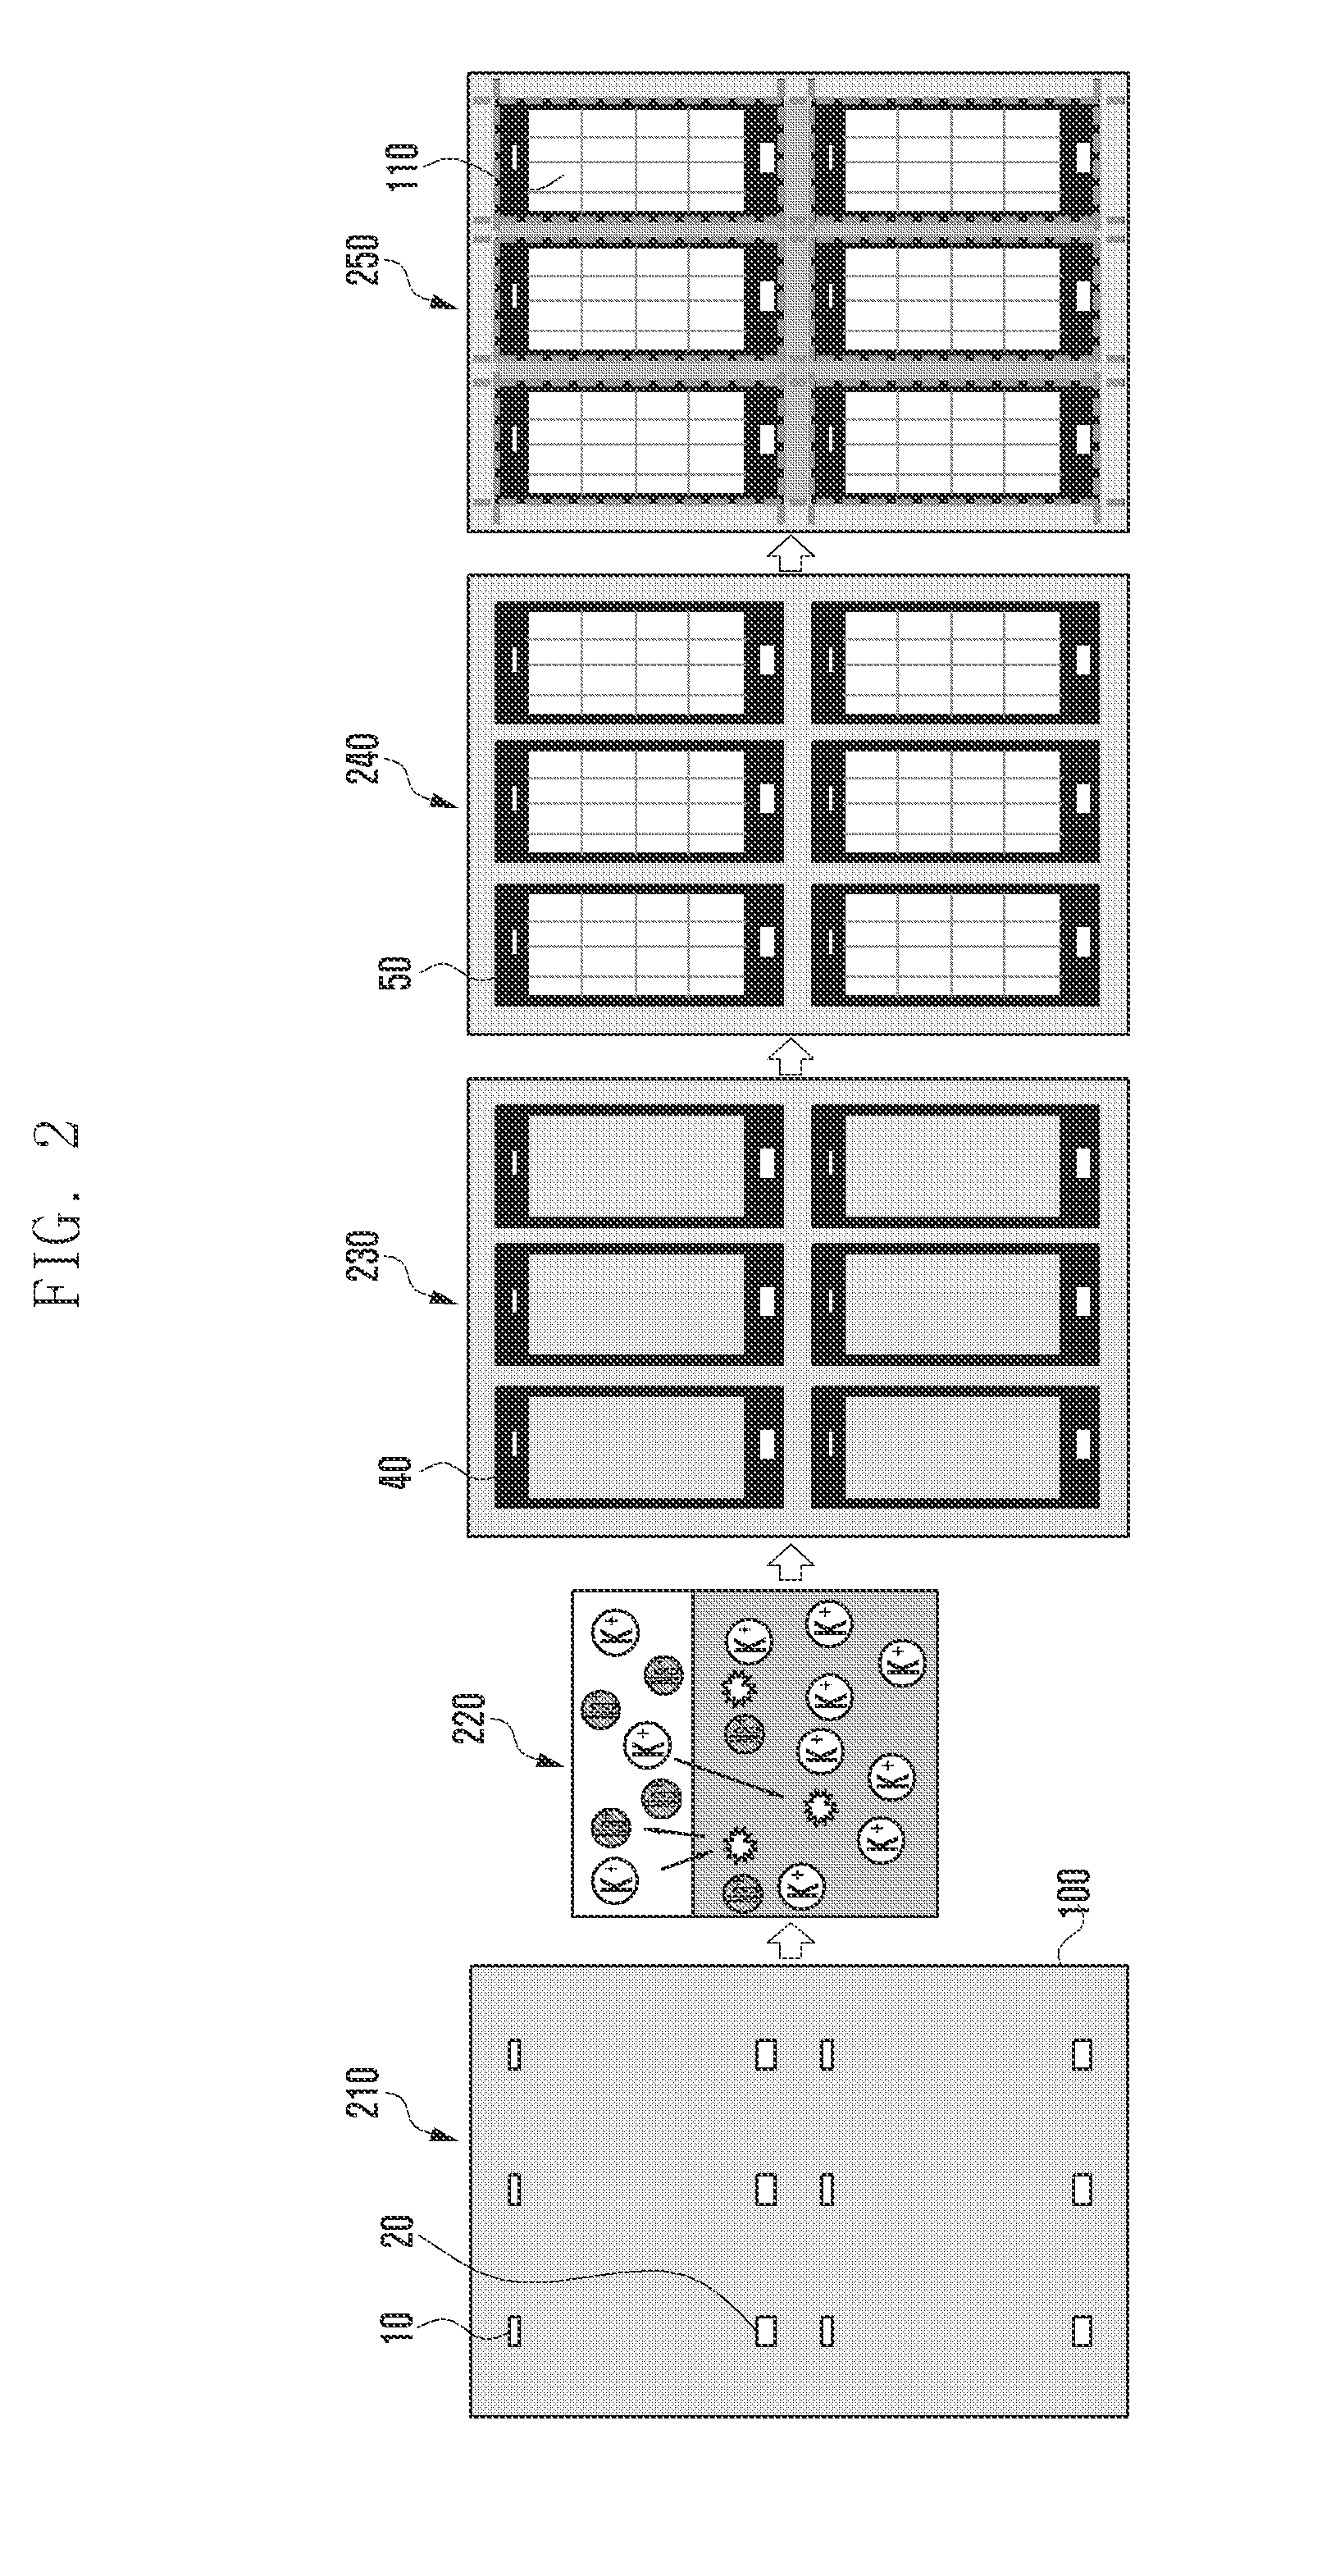 Method for manufacturing tempered-glass panels for electronic devices